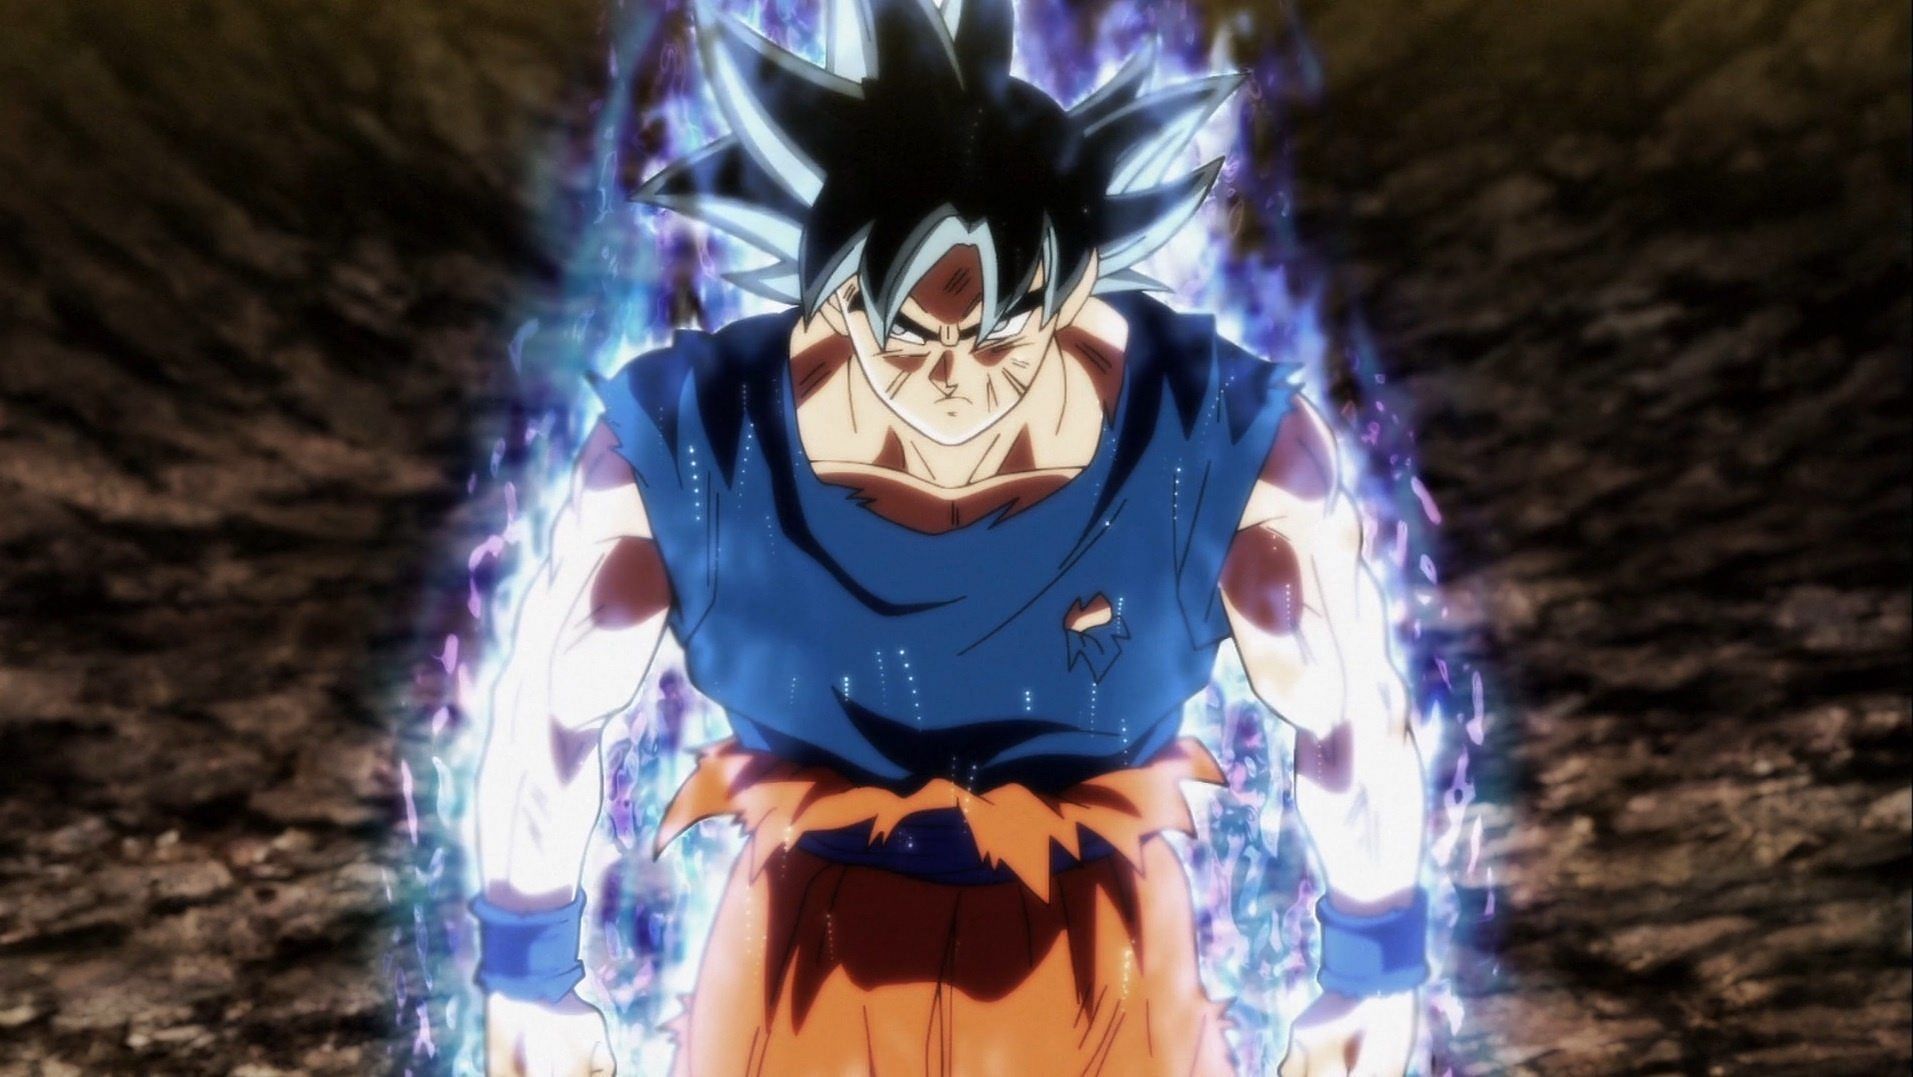 Can a human in Dragon Ball ever achieve Ultra Instinct?